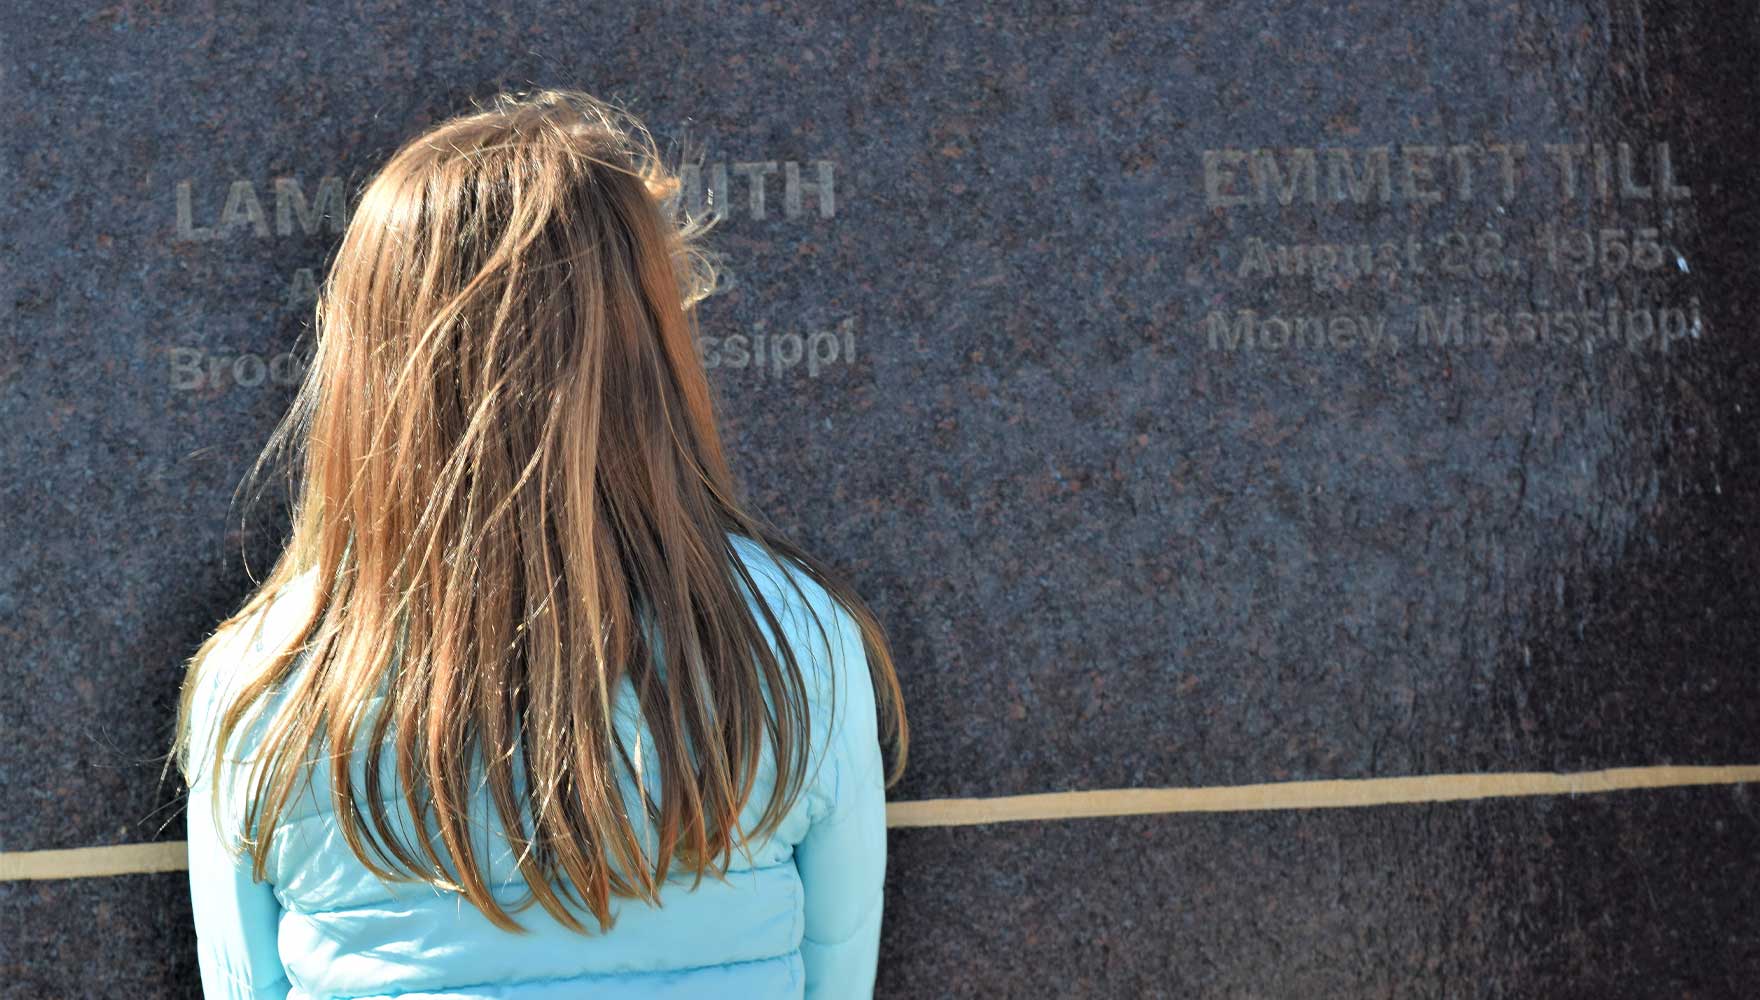 A young girl with blonde hair contemplates the monument at the Peace and Justice Memorial Center, which memorializes people who were victims of racial violence during the 1950s, including Emmett Till, whose name and the date and place of his murder are inscribed on the monument.